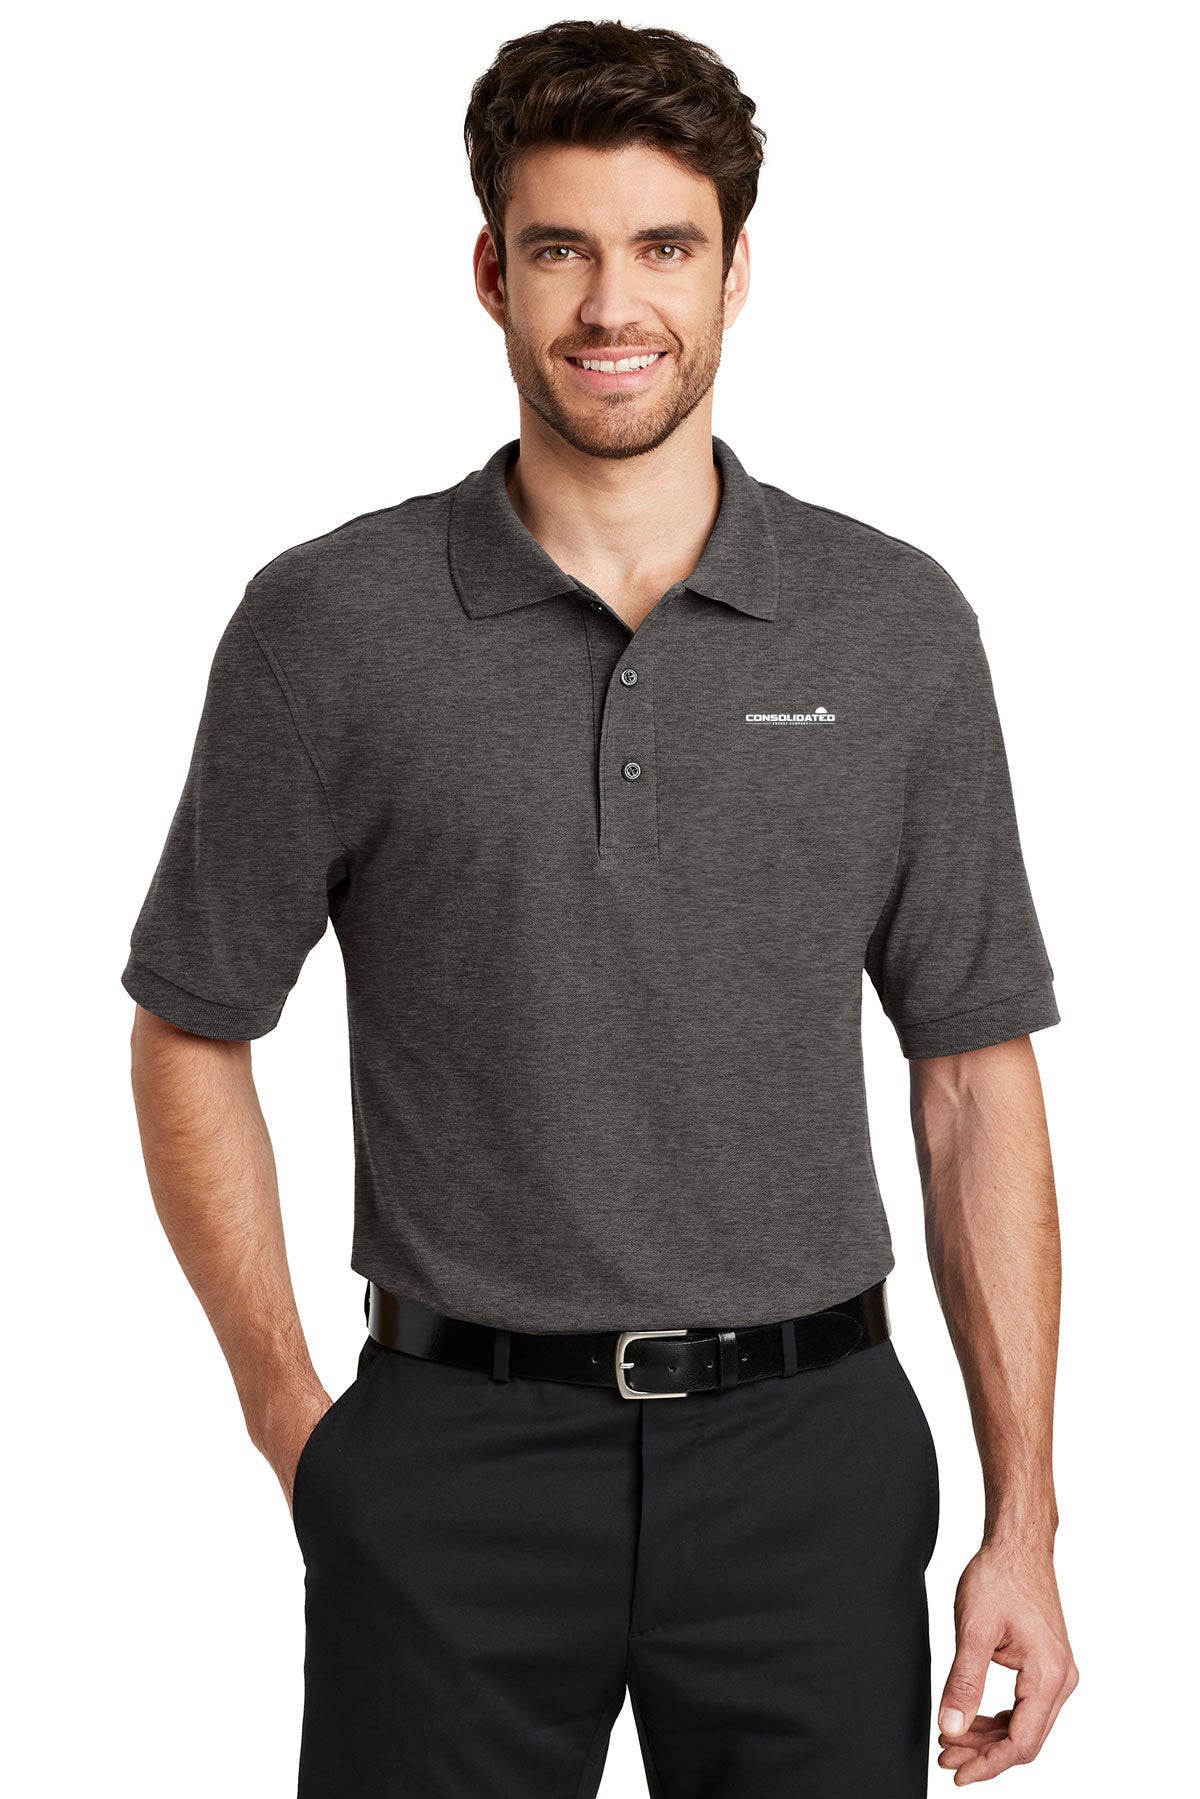 Consolidated Energy Company Silk Touch Polo